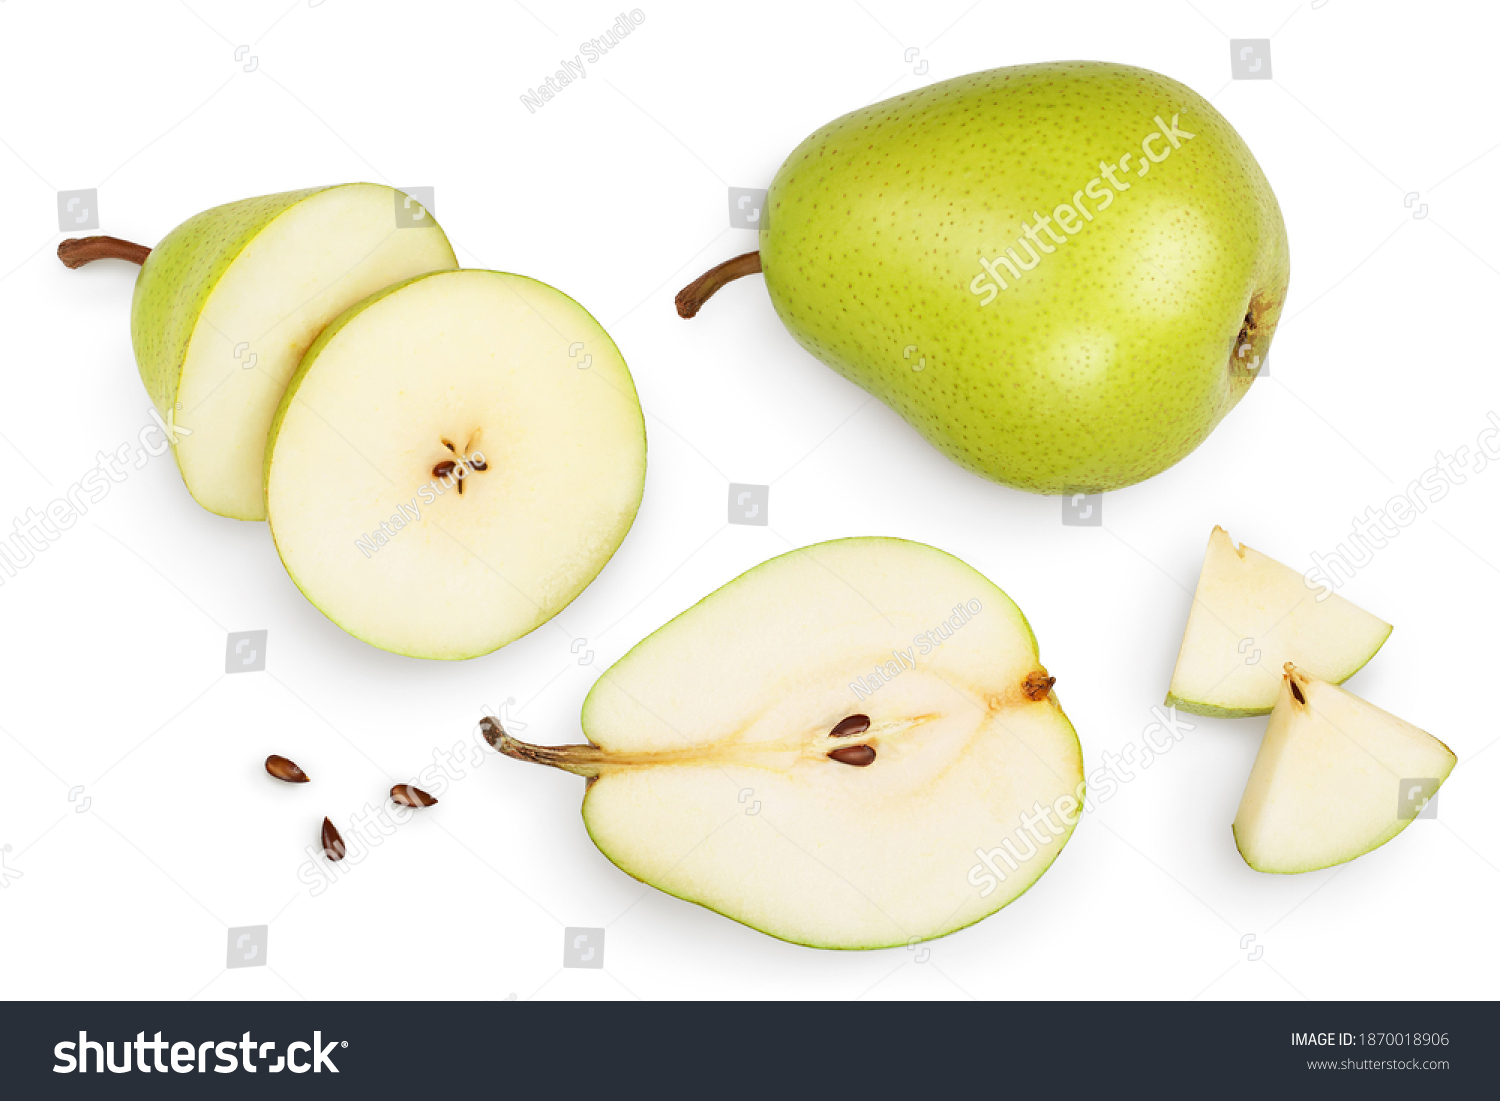 Green pear fruit with half and slices isolated on white background with clipping path. Top view. Flat lay #1870018906